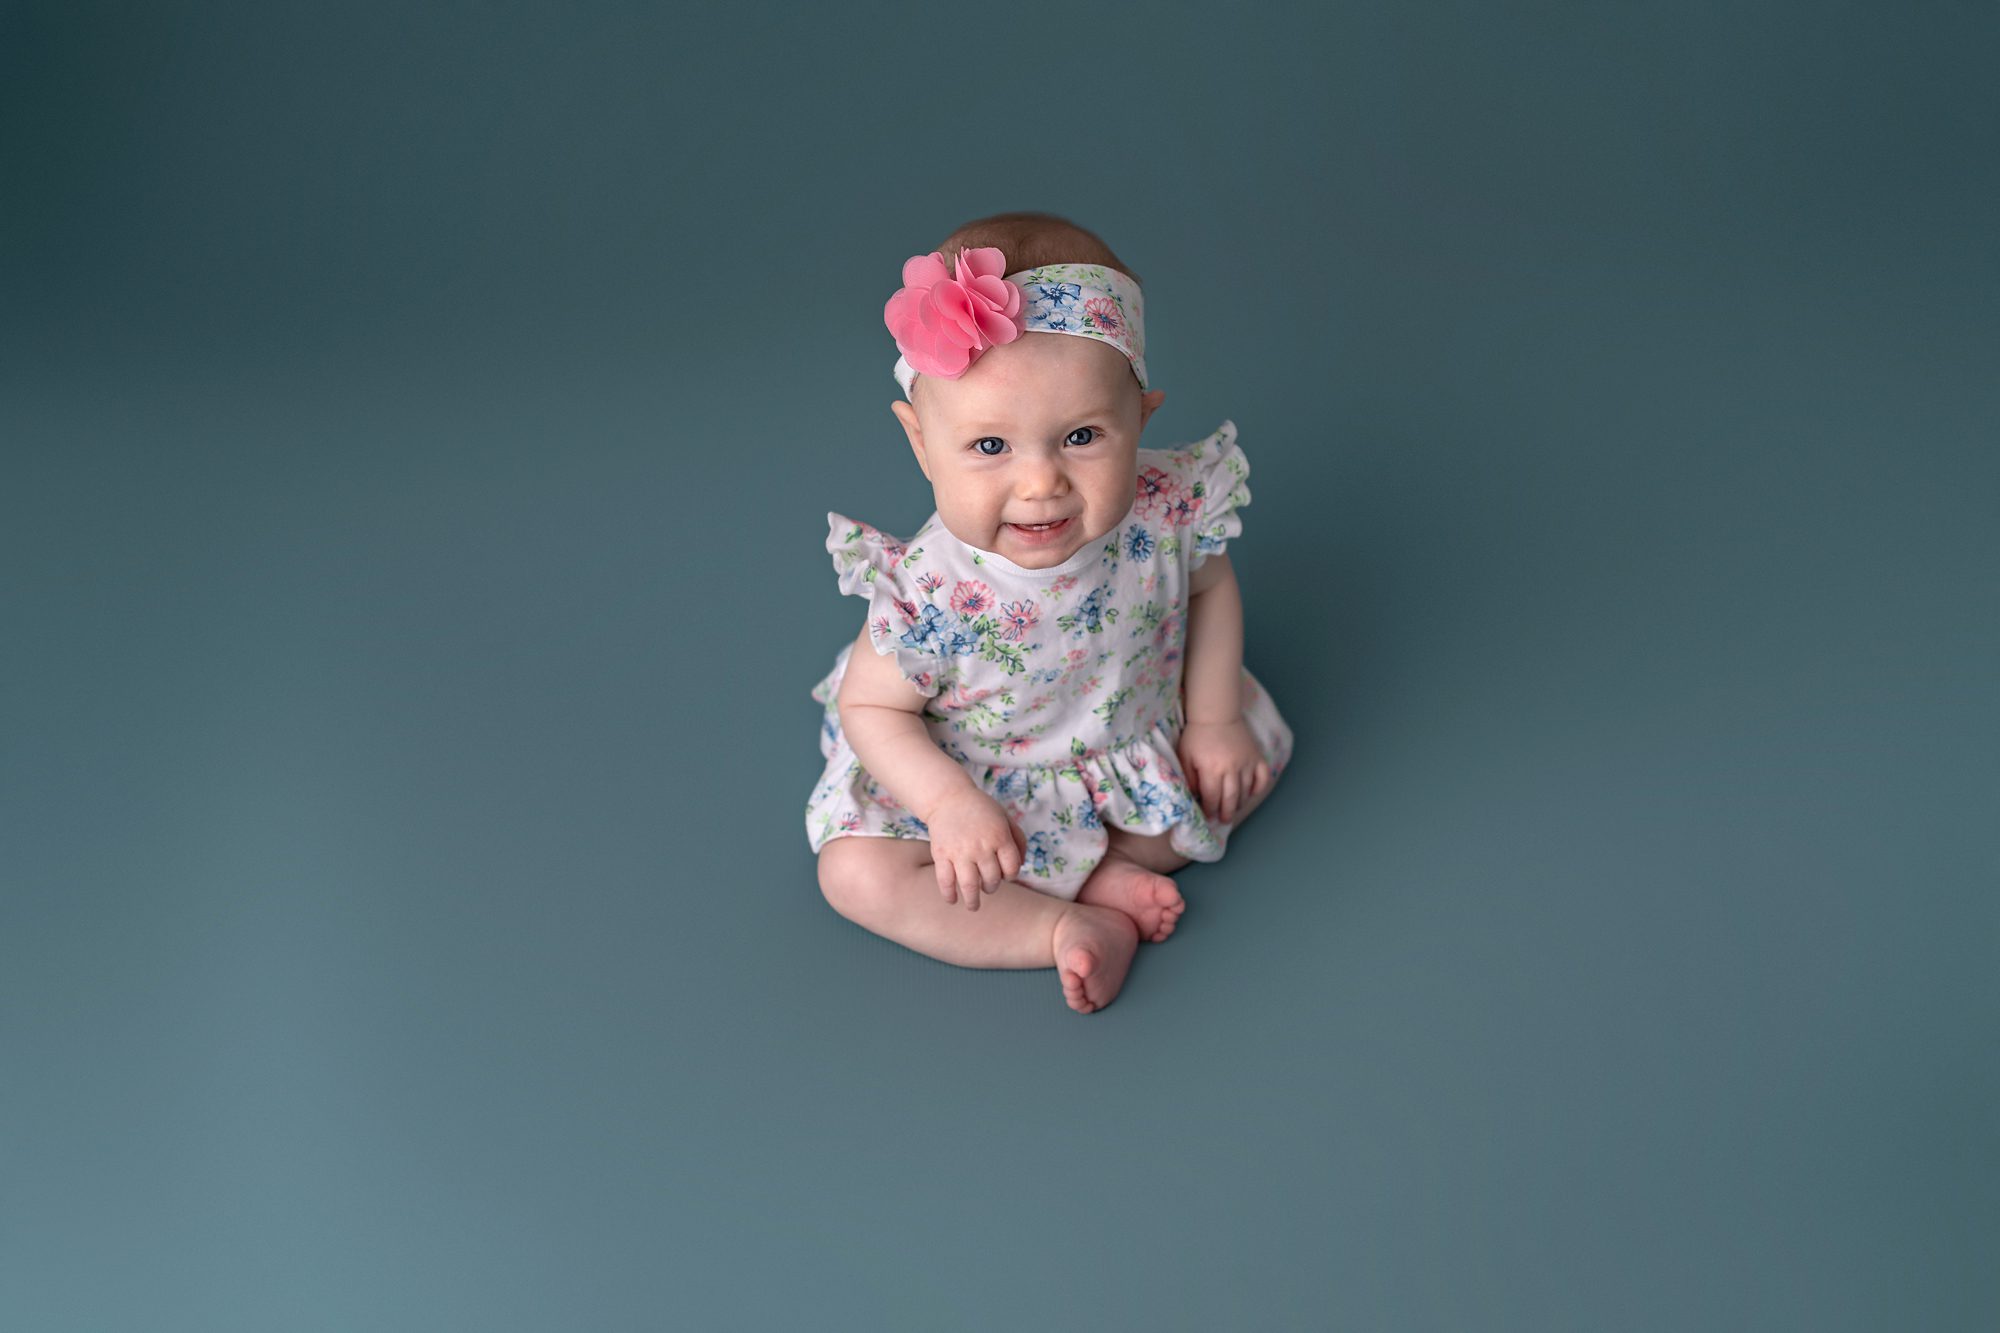 Baby girl sitting and smiling on teal background, photographed at Kansas City photography studio Faces You Love